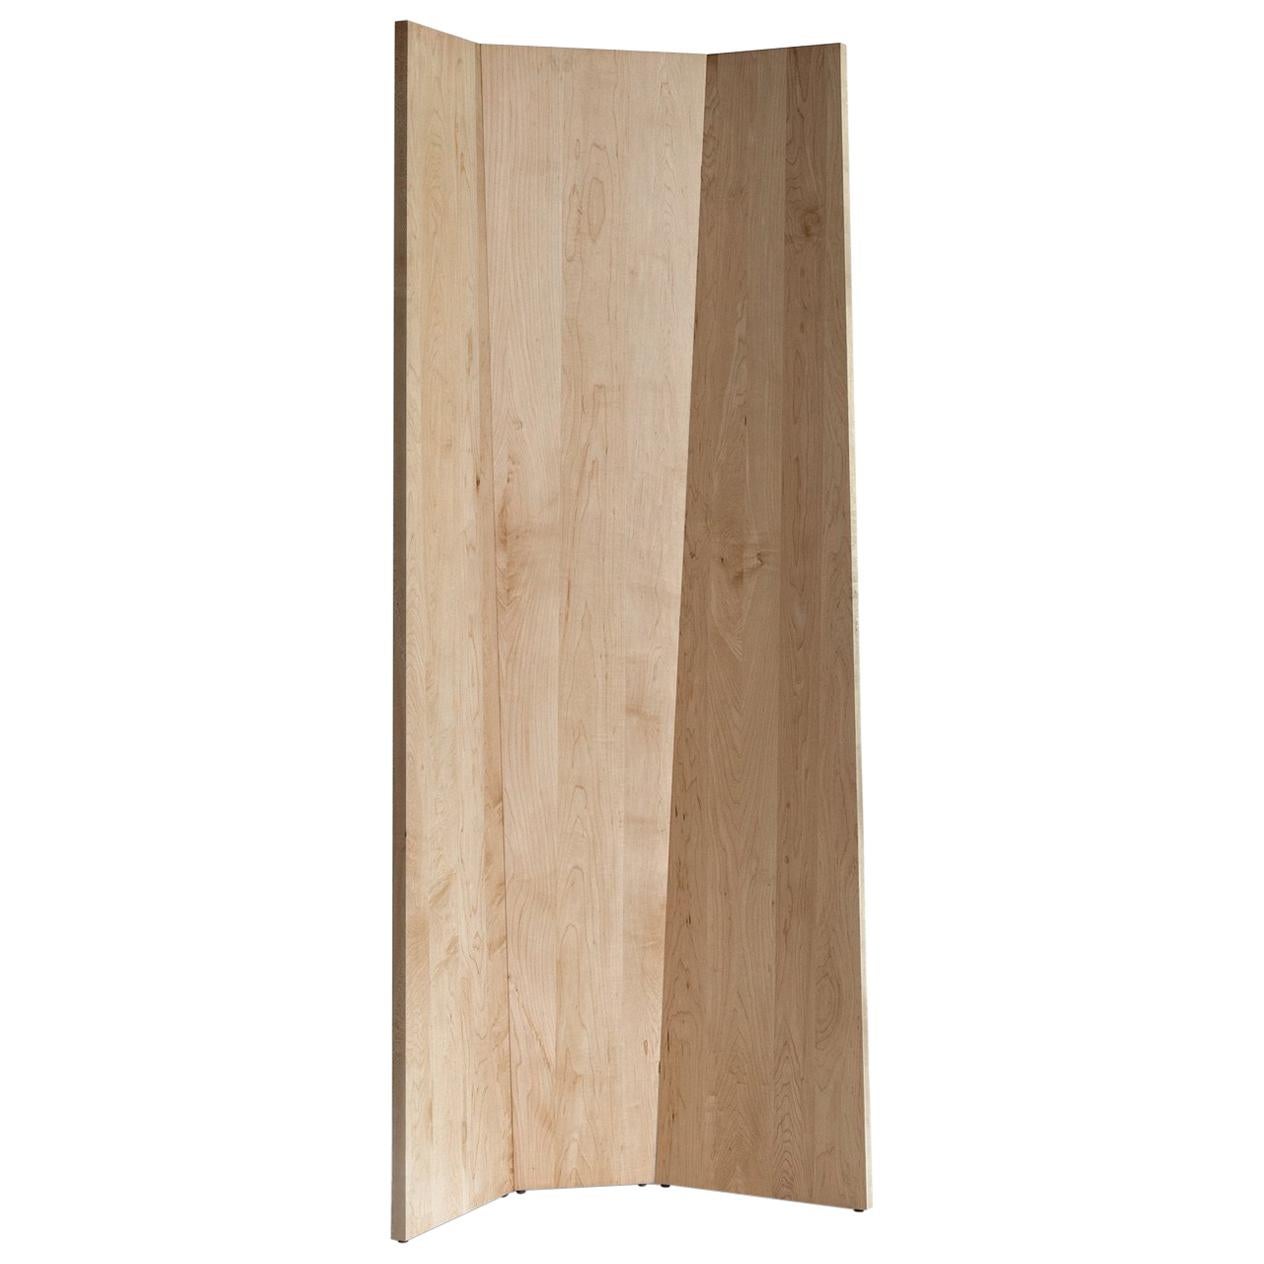 Tri-Fold Solid Maple Folding Screen or Room Divider